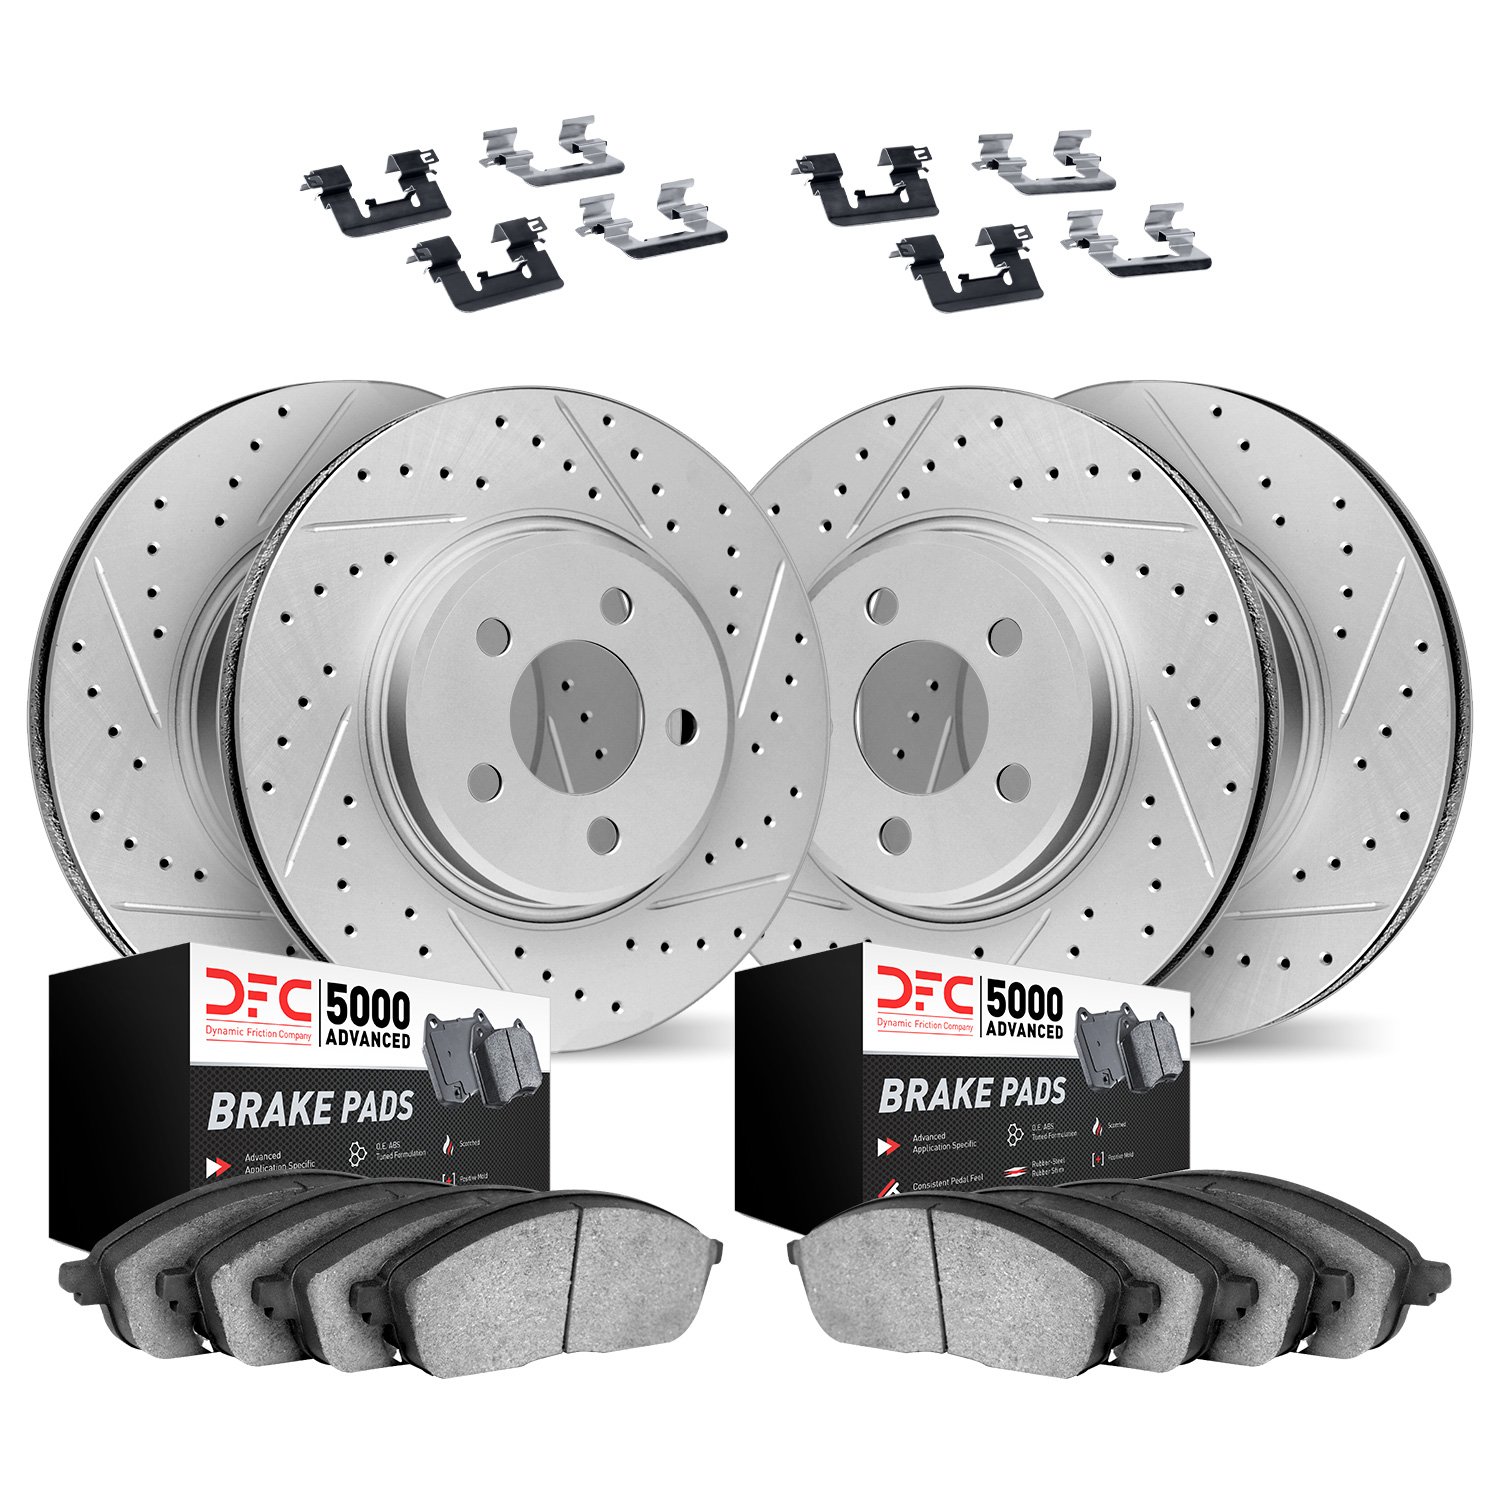 2514-13037 Geoperformance Drilled/Slotted Rotors w/5000 Advanced Brake Pads Kit & Hardware, 2006-2014 Subaru, Position: Front an